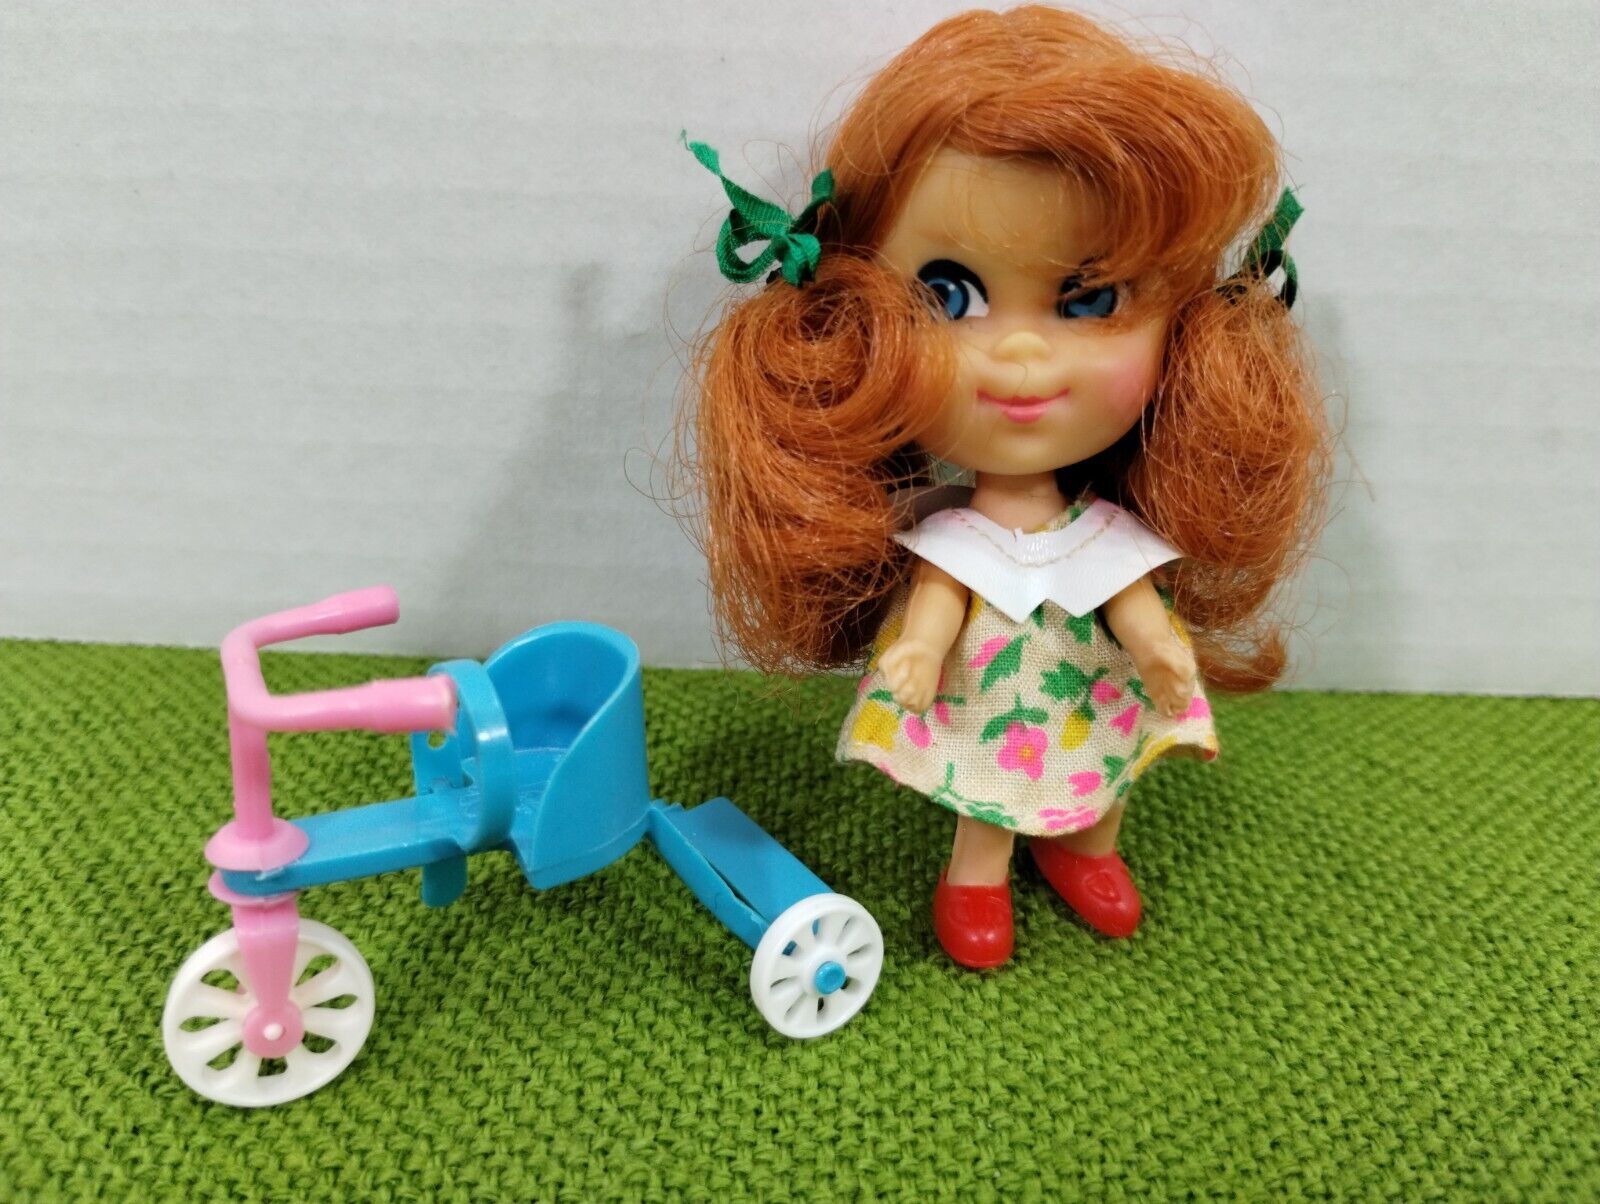 1960s Mattel Liddle Kiddle Doll Trikey Triddle Tricycle & Outfit